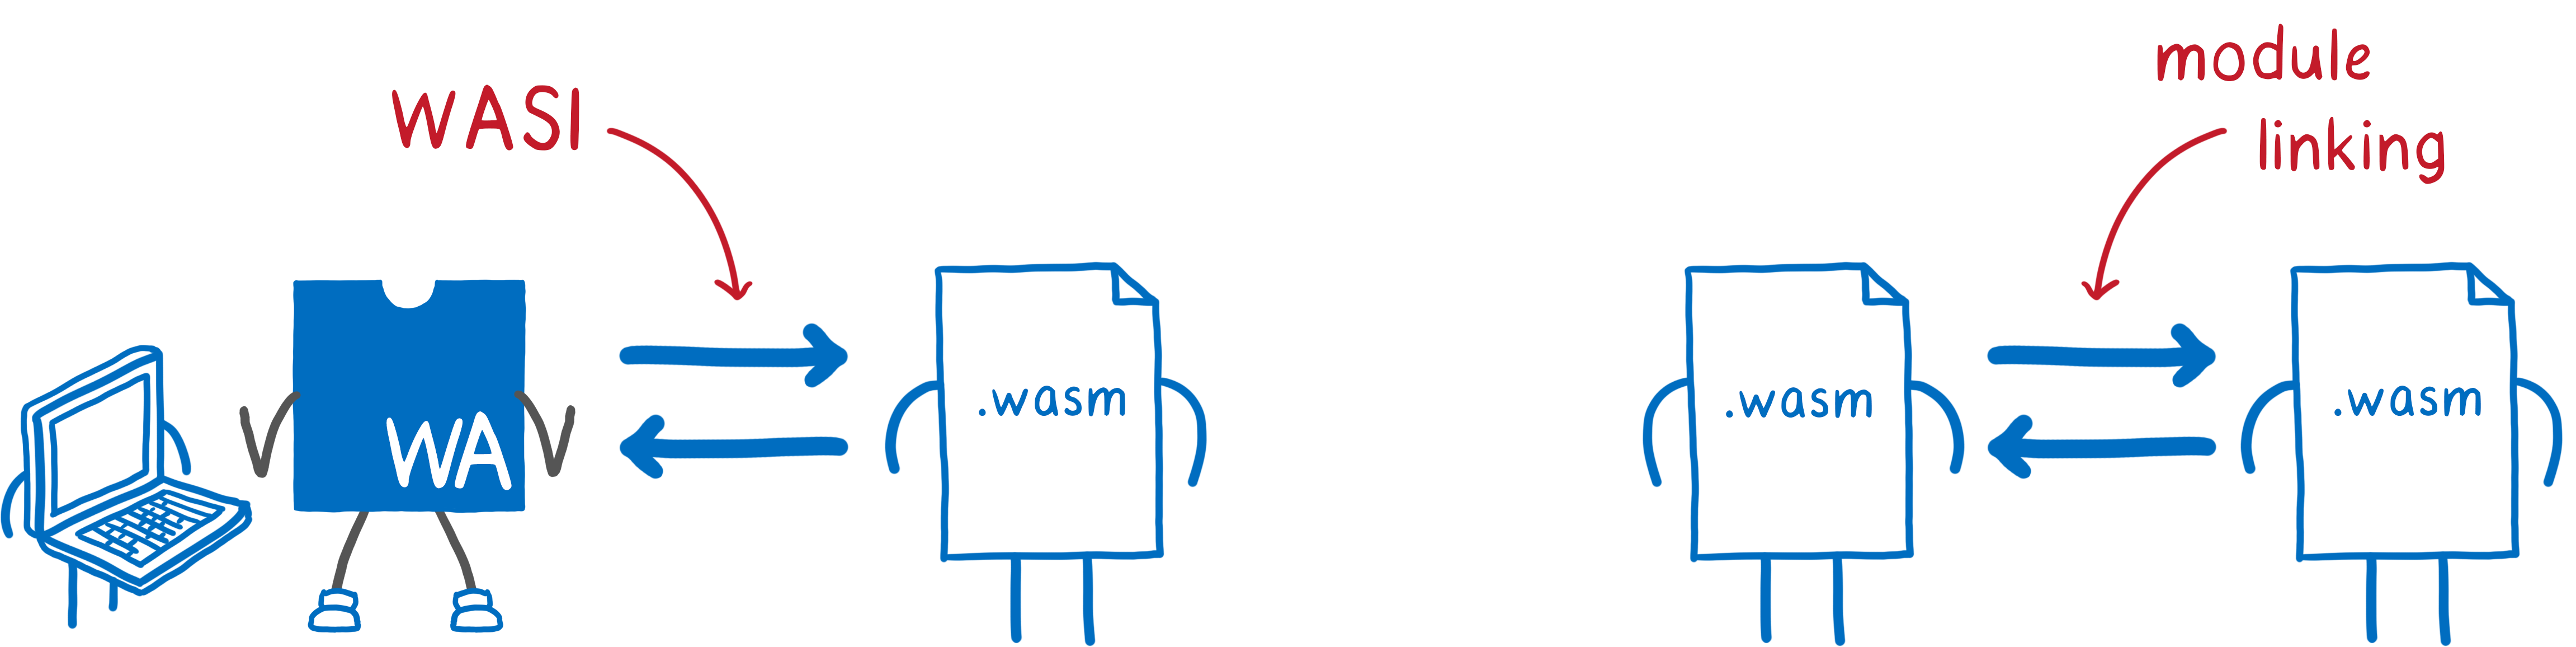 On the left, a WebAssembly module and host talking to each other using WASI. On the right, two WebAssembly modules talking to each other using module linking.